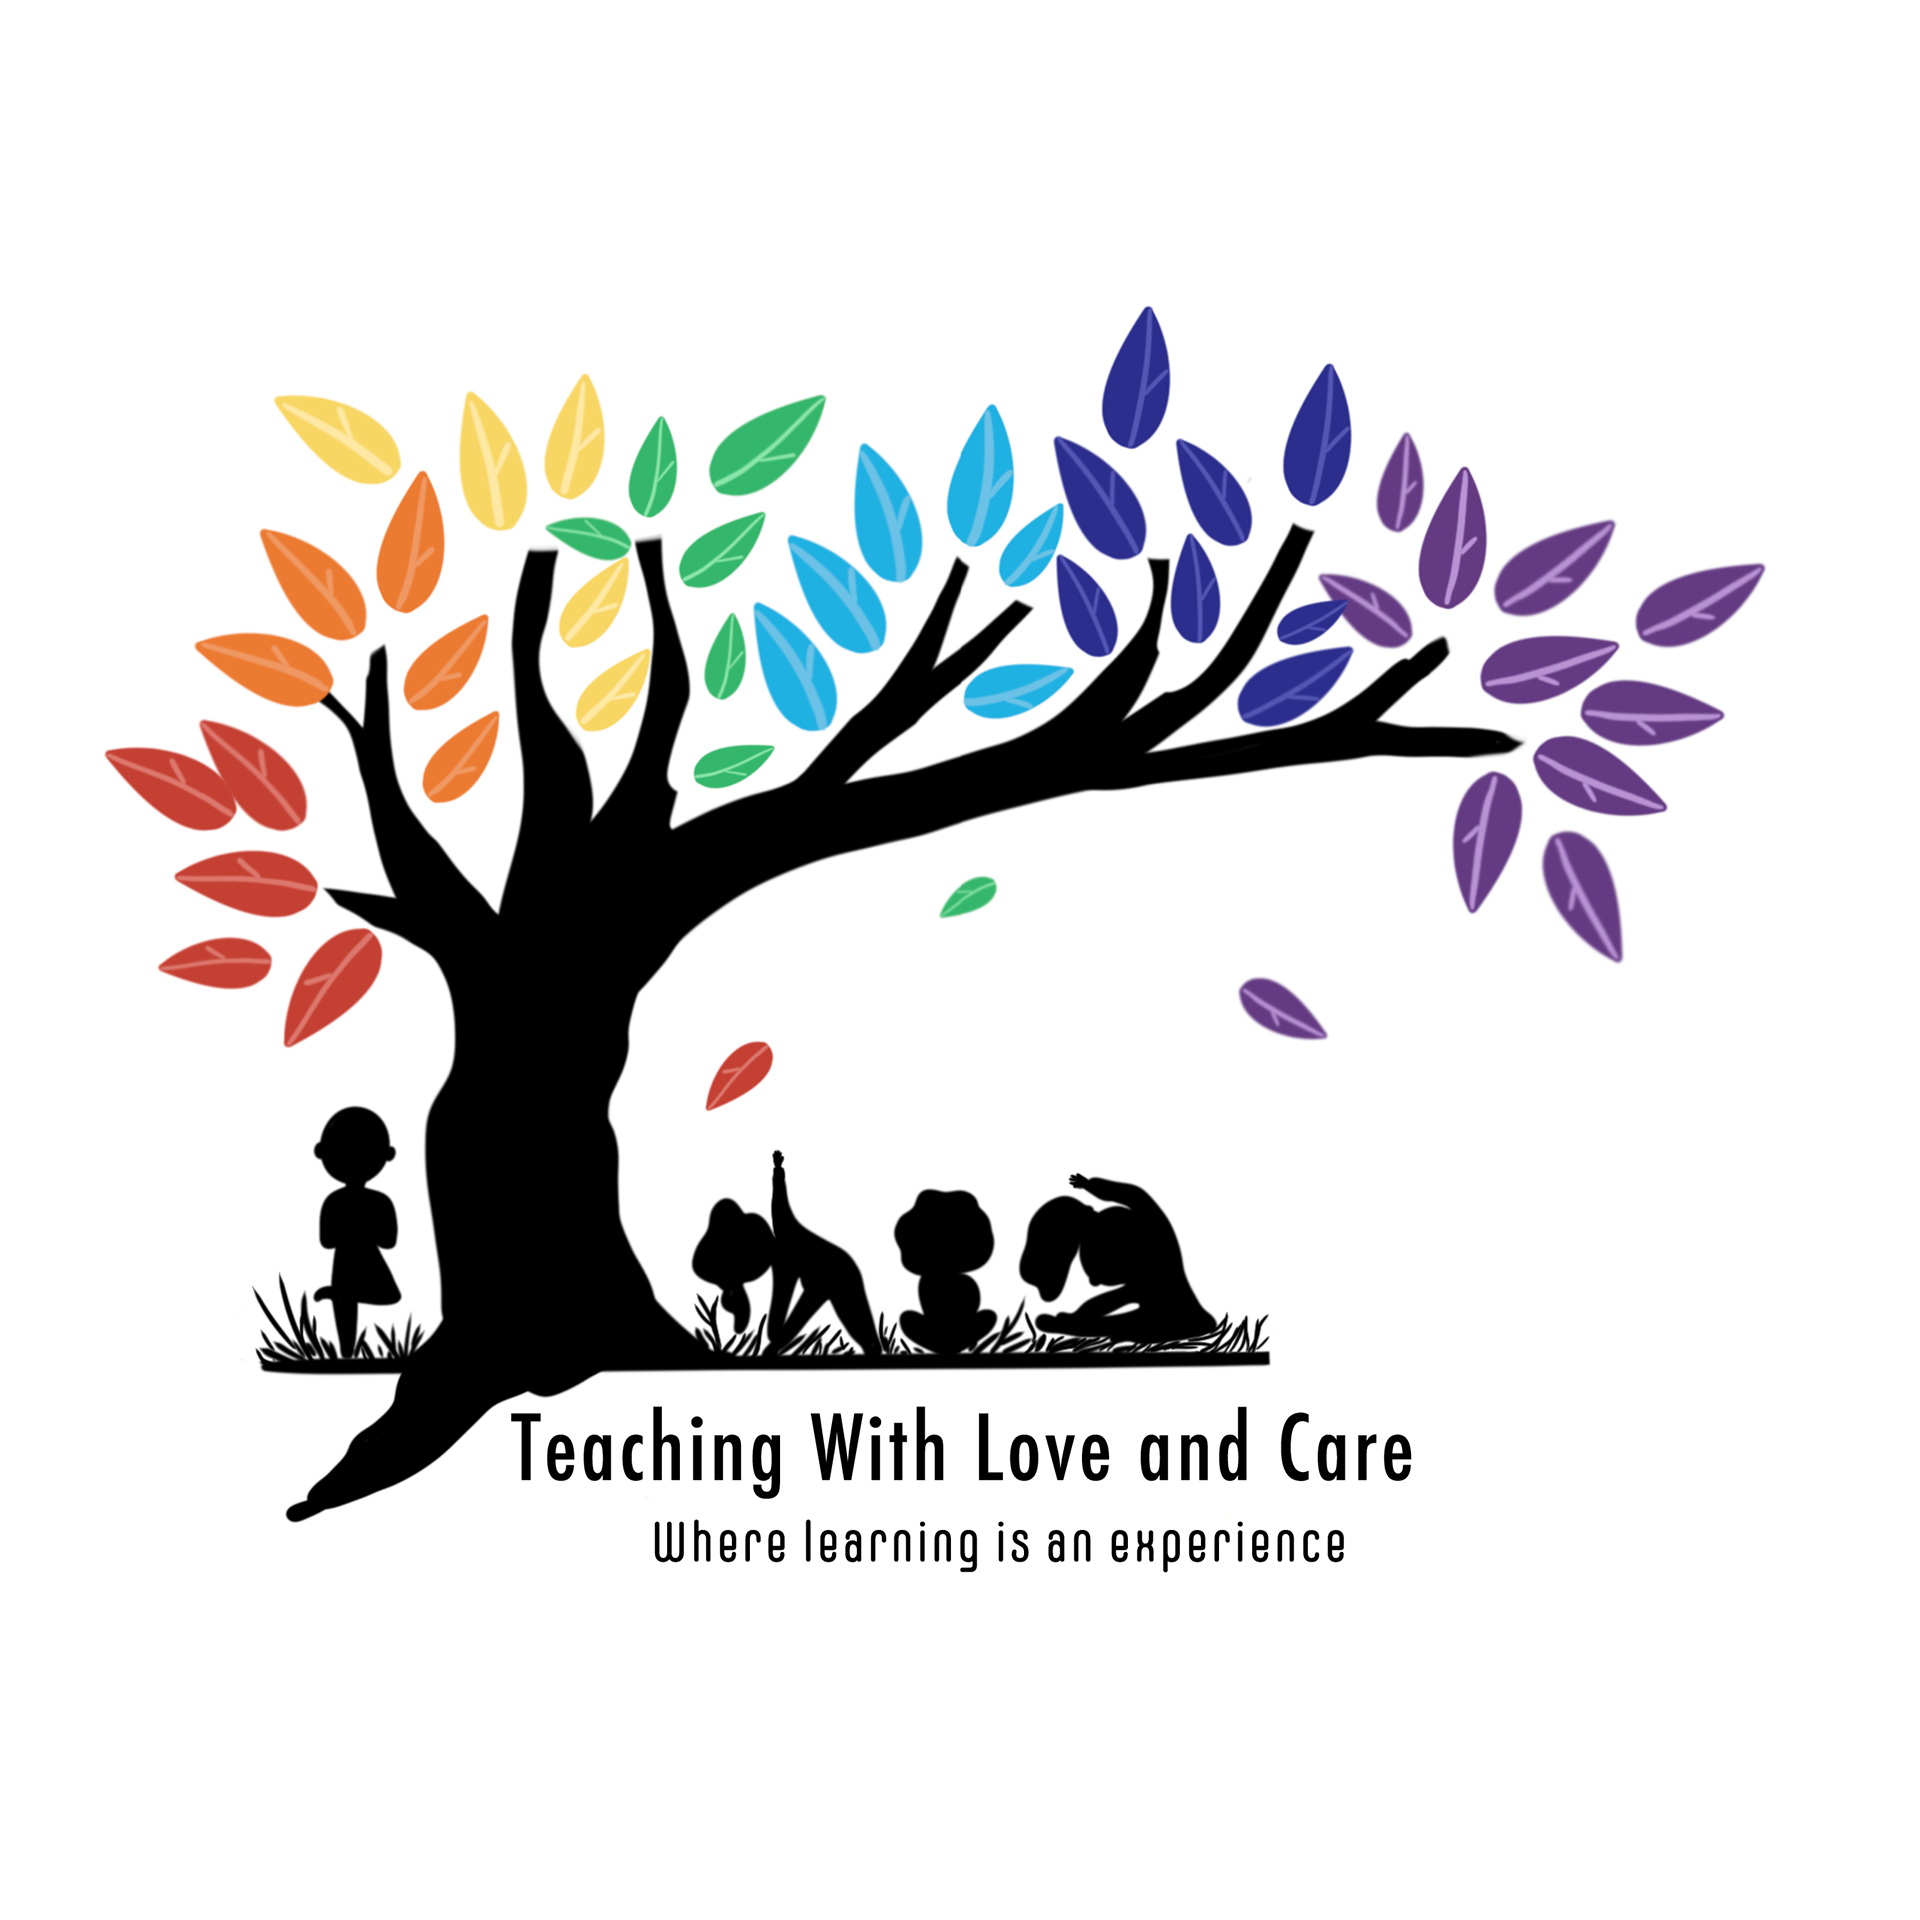 Teaching With Love and Care